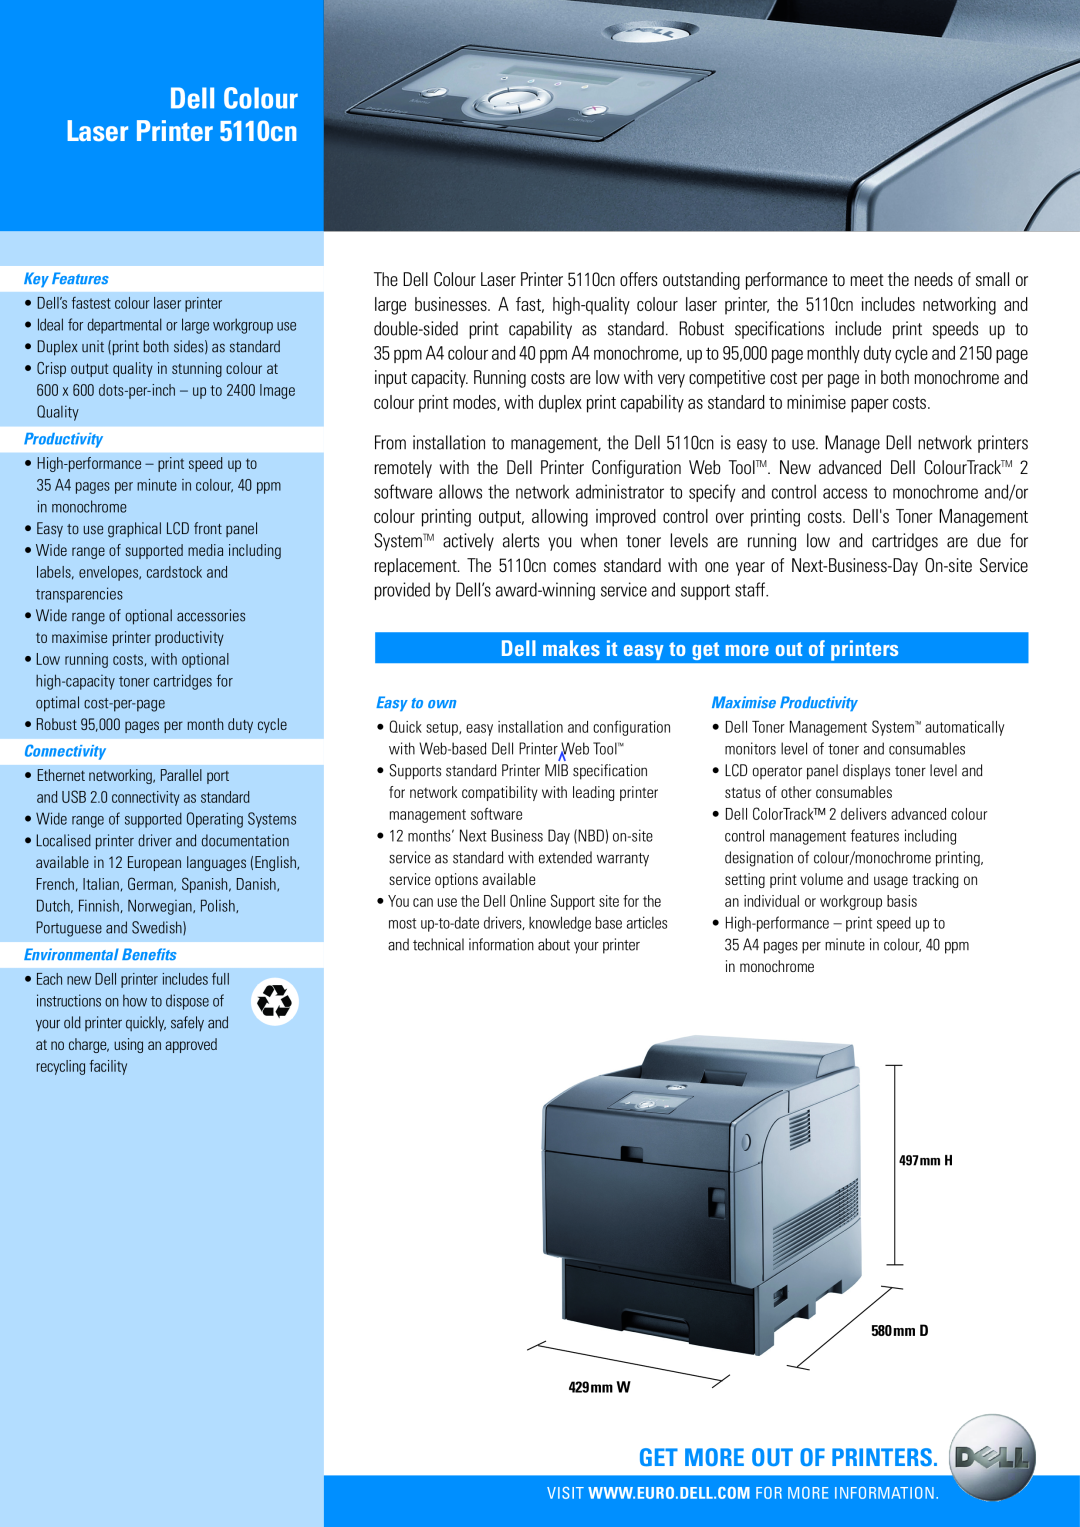 Dell specifications Get More Out Of Printers, Dell Colour Laser Printer 5110cn, Key Features, Productivity, Easy to own 